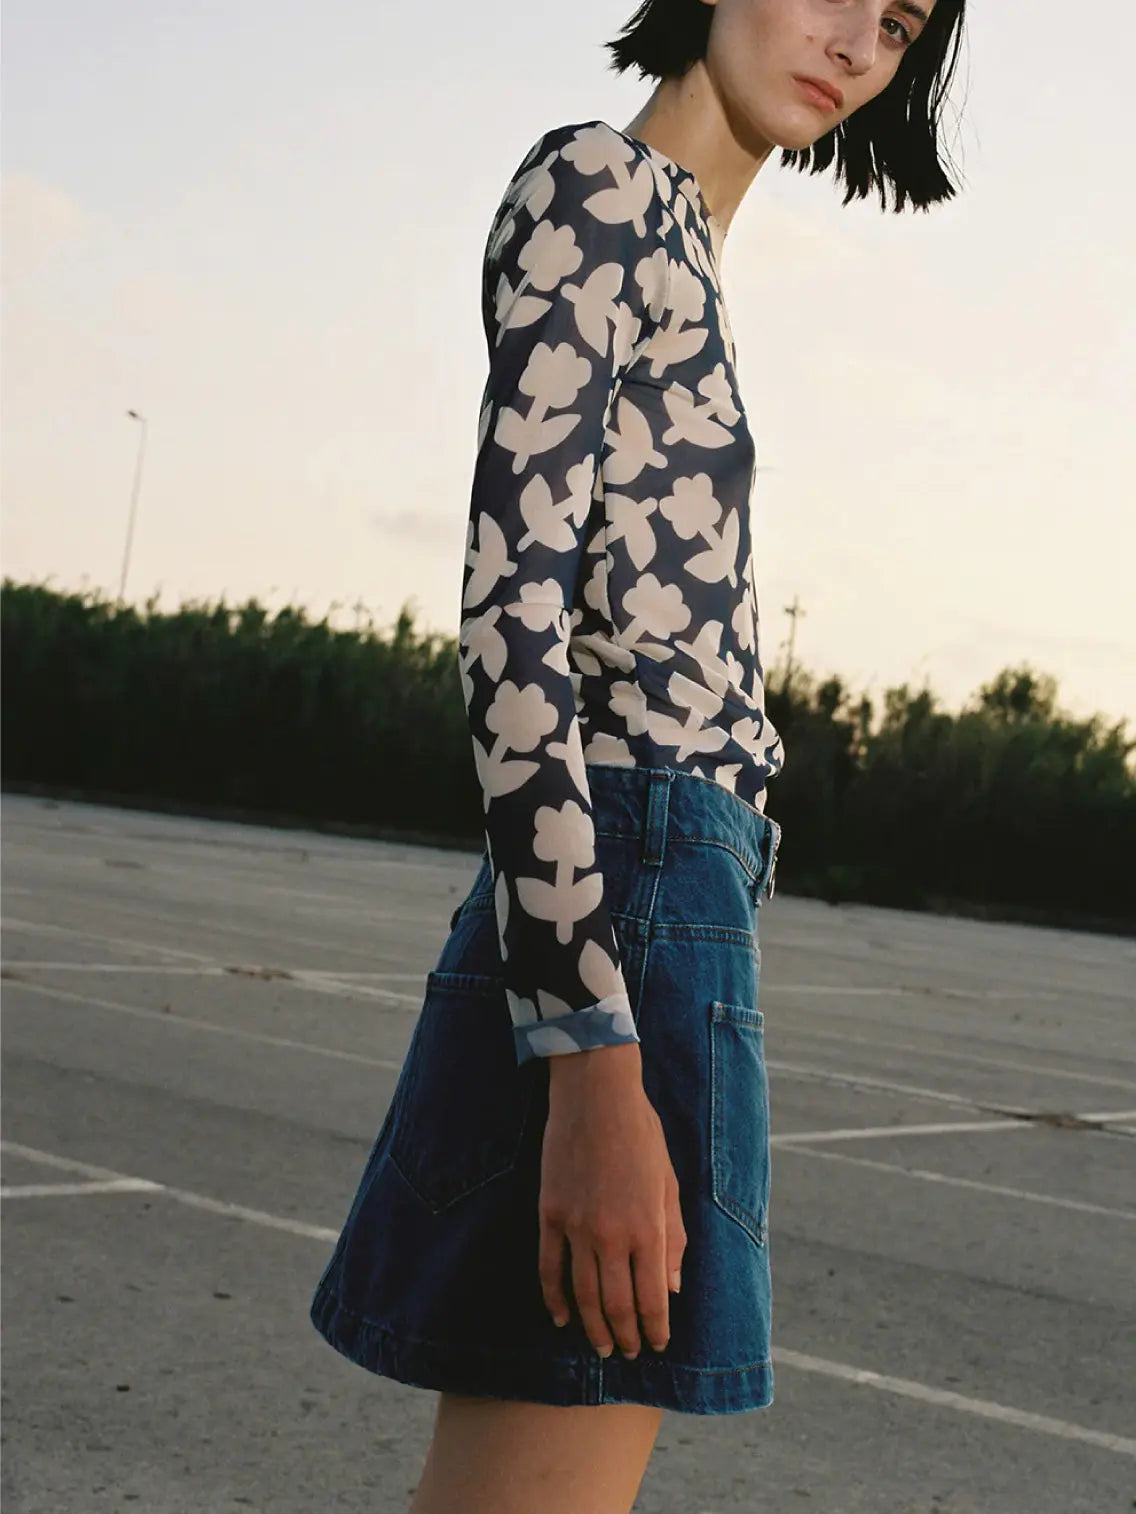 A person is standing outdoors wearing a long-sleeve top with a white floral pattern on a dark background and a Denim Mini Skirt from Mundaka, featuring a front zipper and large pockets. The top has a fitted design, and the skirt ends above the knees.